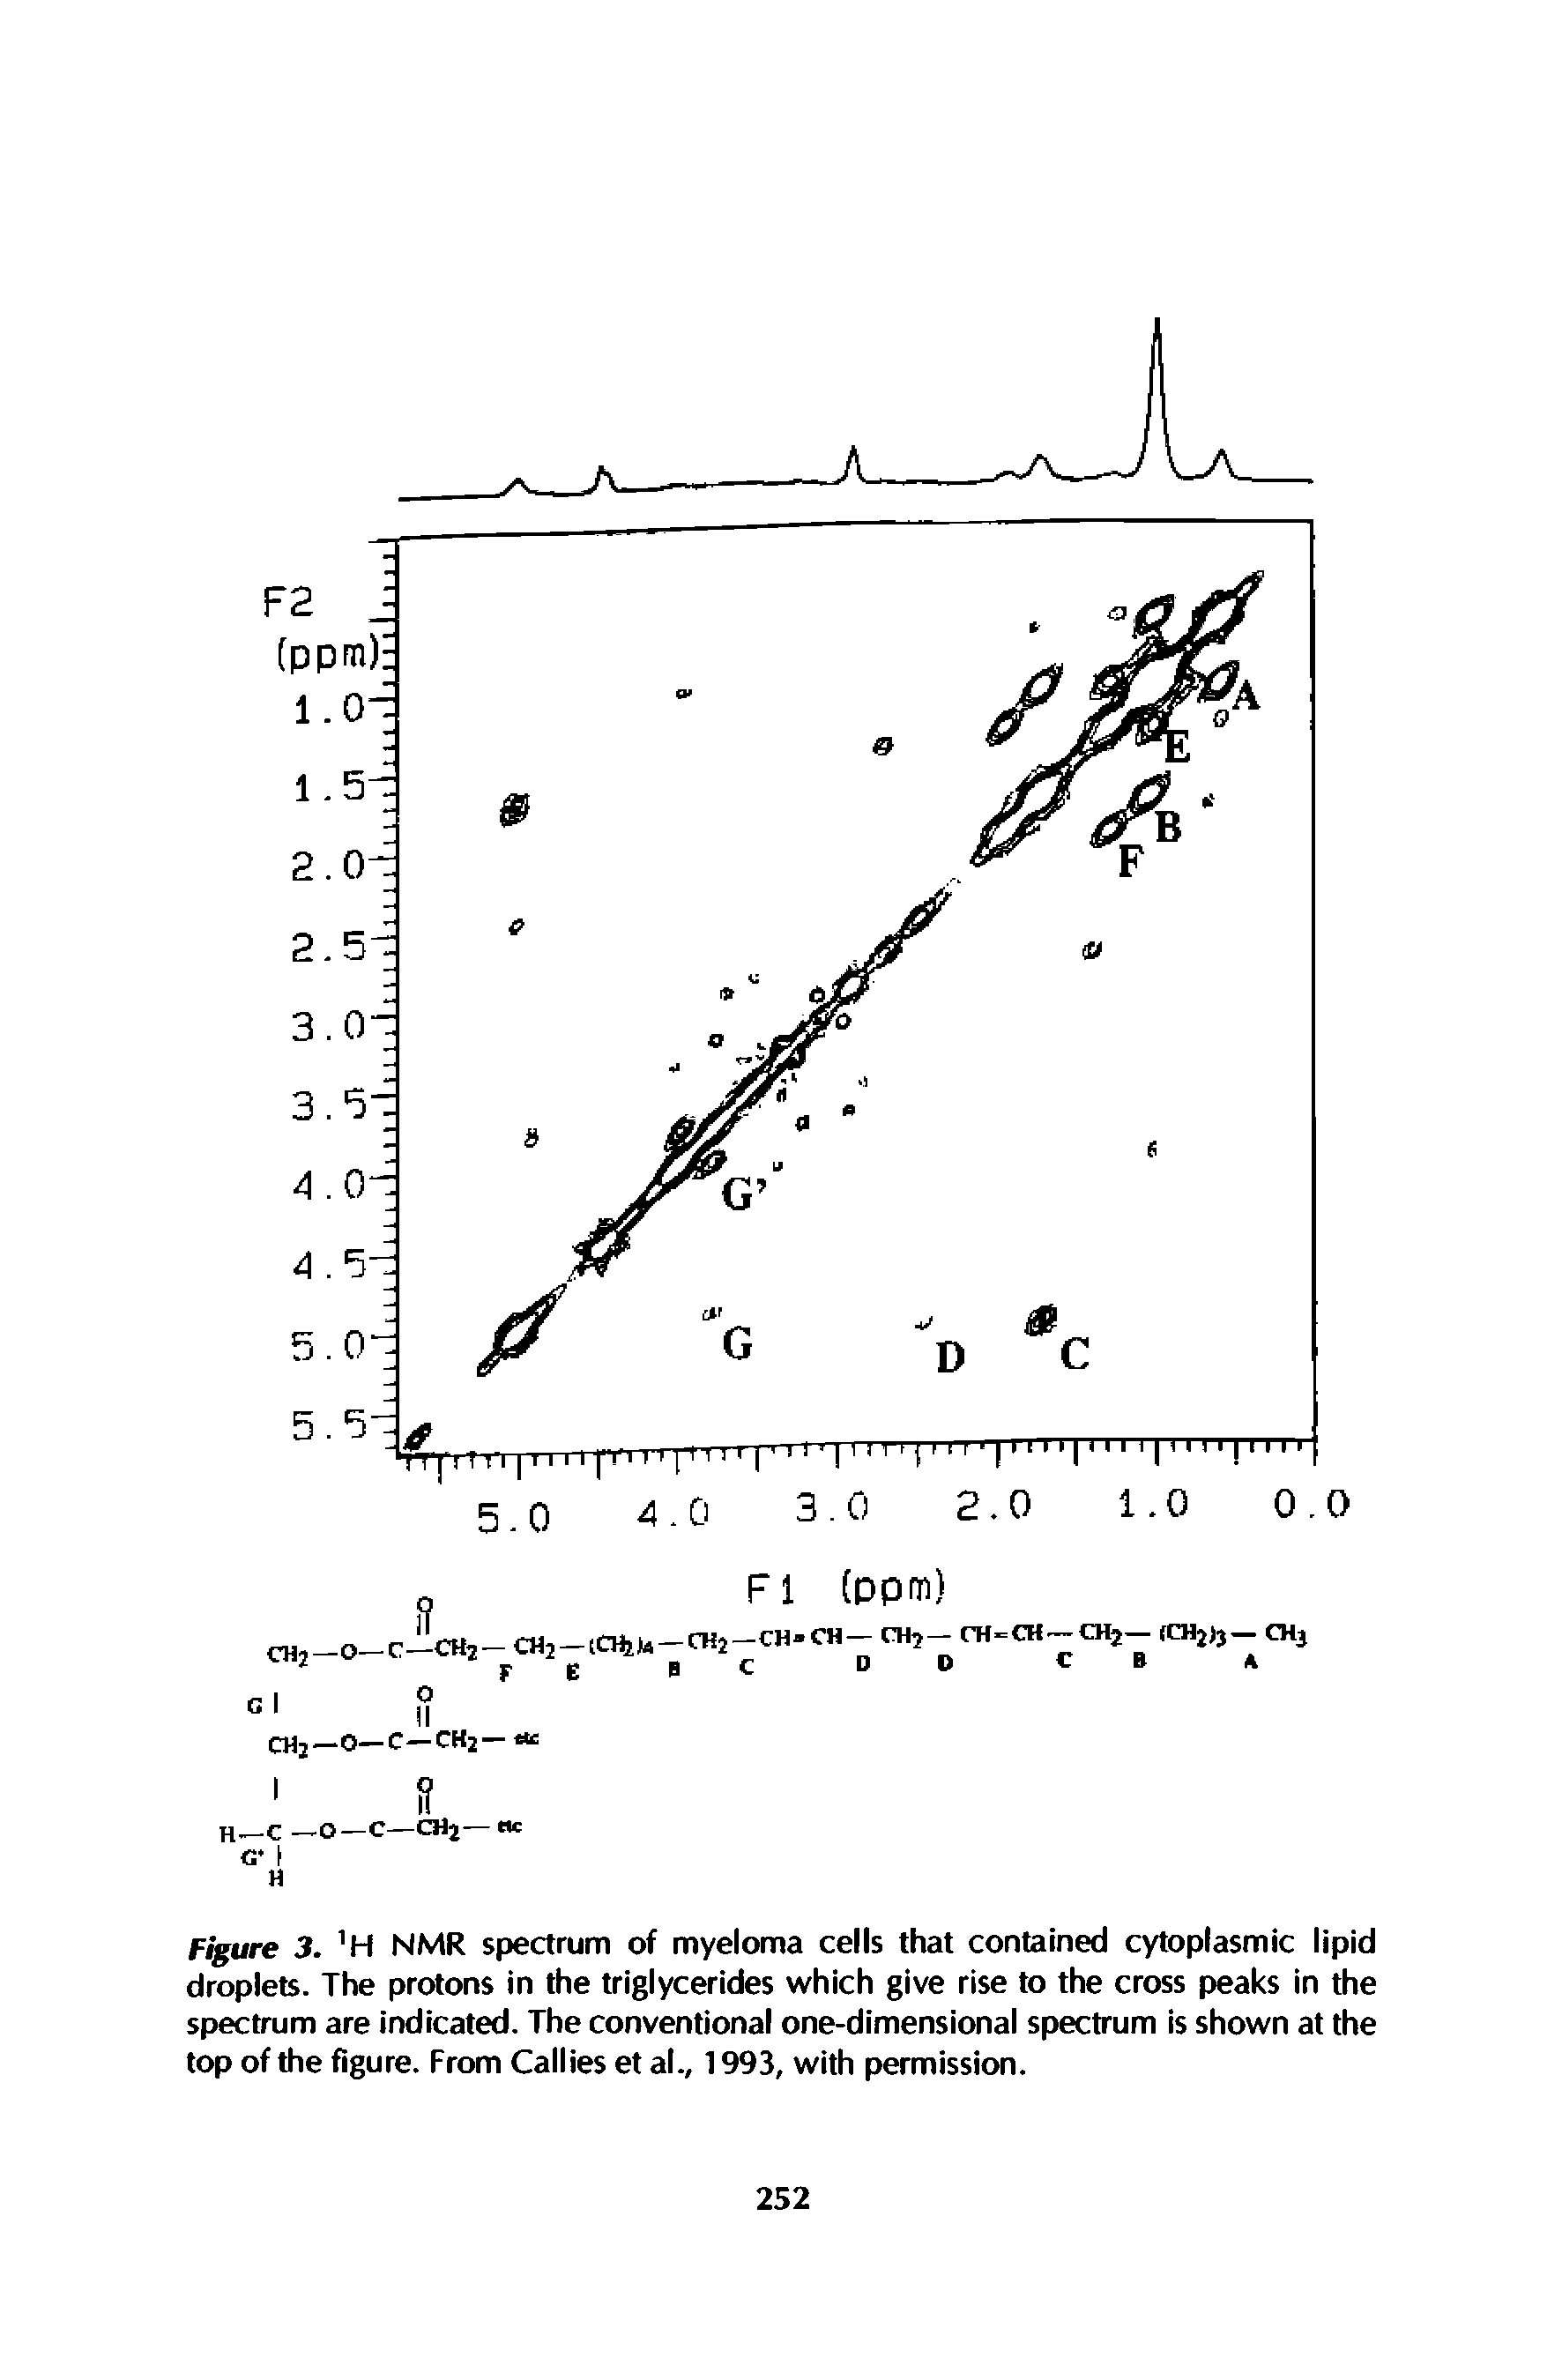 Figure 3. H NMR spectrum of myeloma cells that contained cytoplasmic lipid droplets. The protons in the triglycerides which give rise to the cross peaks in the spectrum are indicated. The conventional one-dimensional spectrum is shown at the top of the figure. From Callies et al., 1993, with permission.